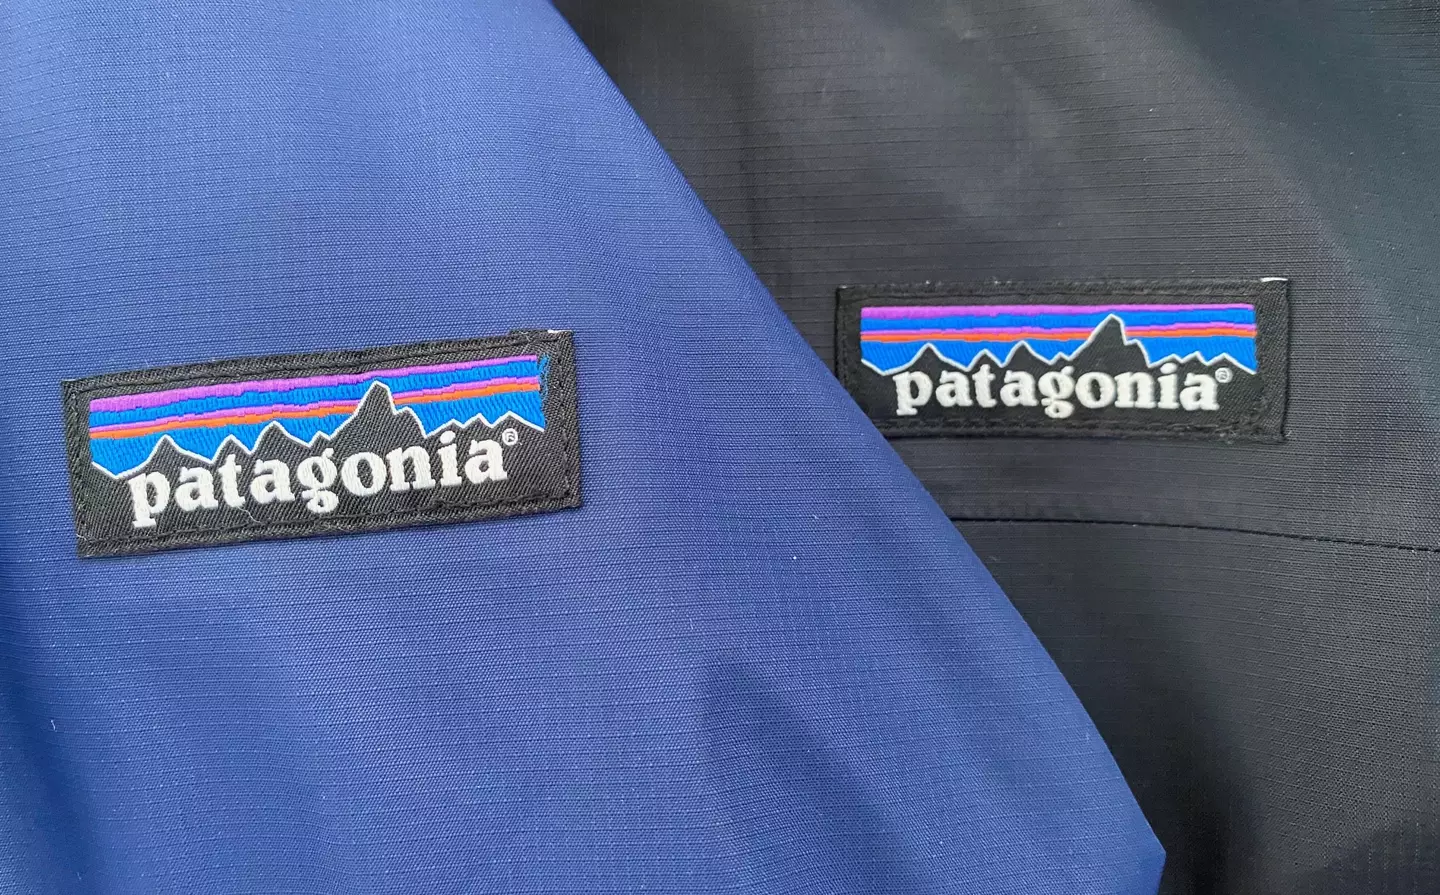 The founder of Patagonia has given the company away.